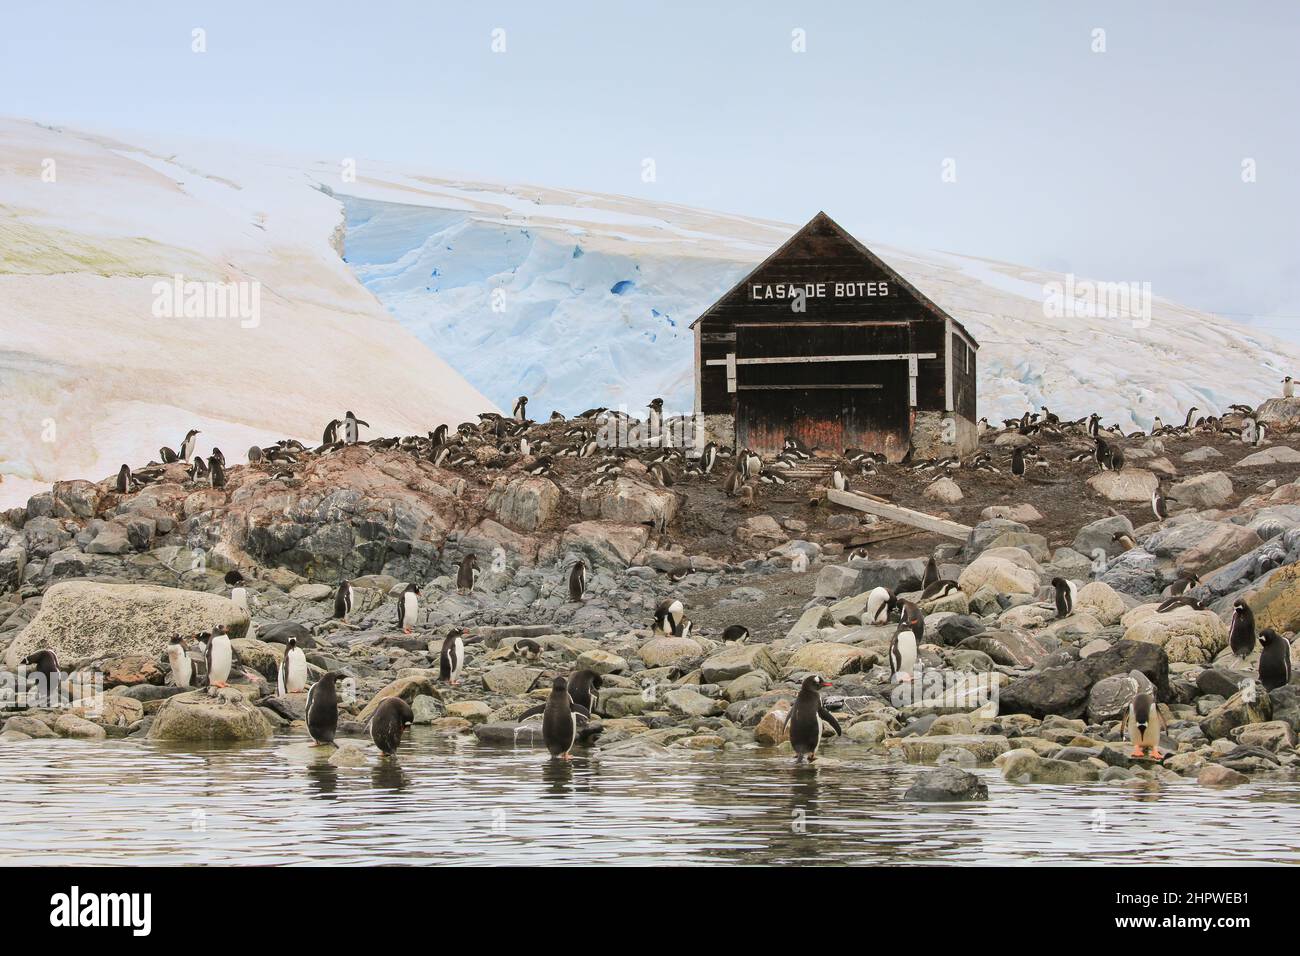 Gentoo penguins near the boat house at the González Videla Station (Chilean Base) in Antarctica. Stock Photo